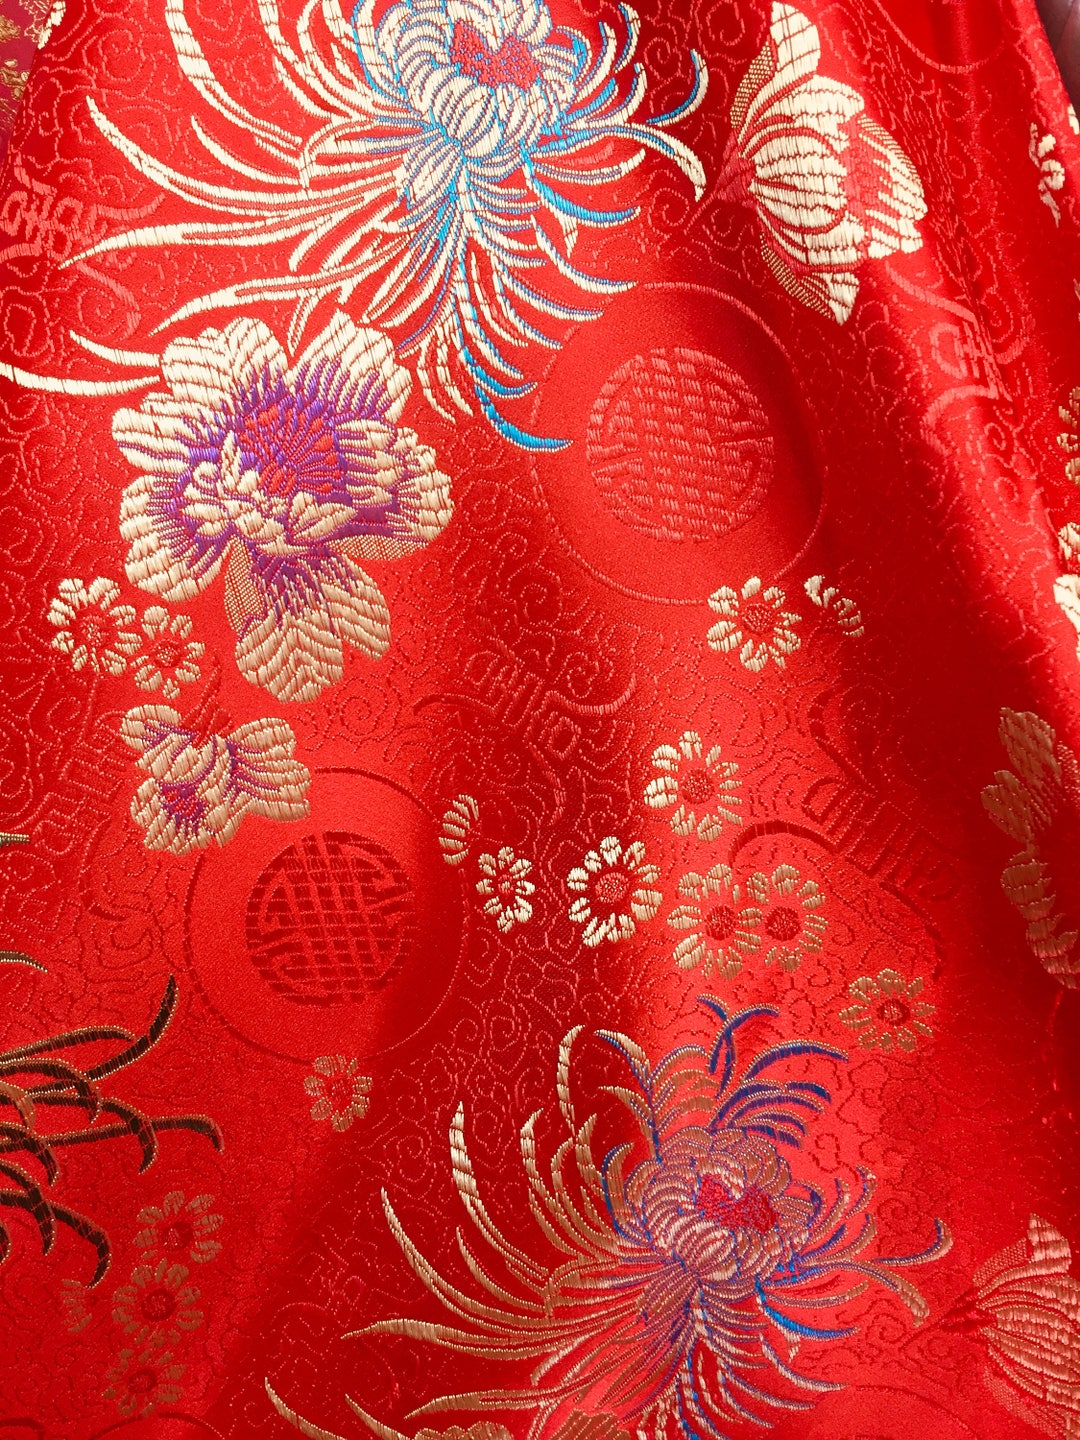 Kate RED Floral Brocade Chinese Satin Fabric by the Yard 10037 - Etsy